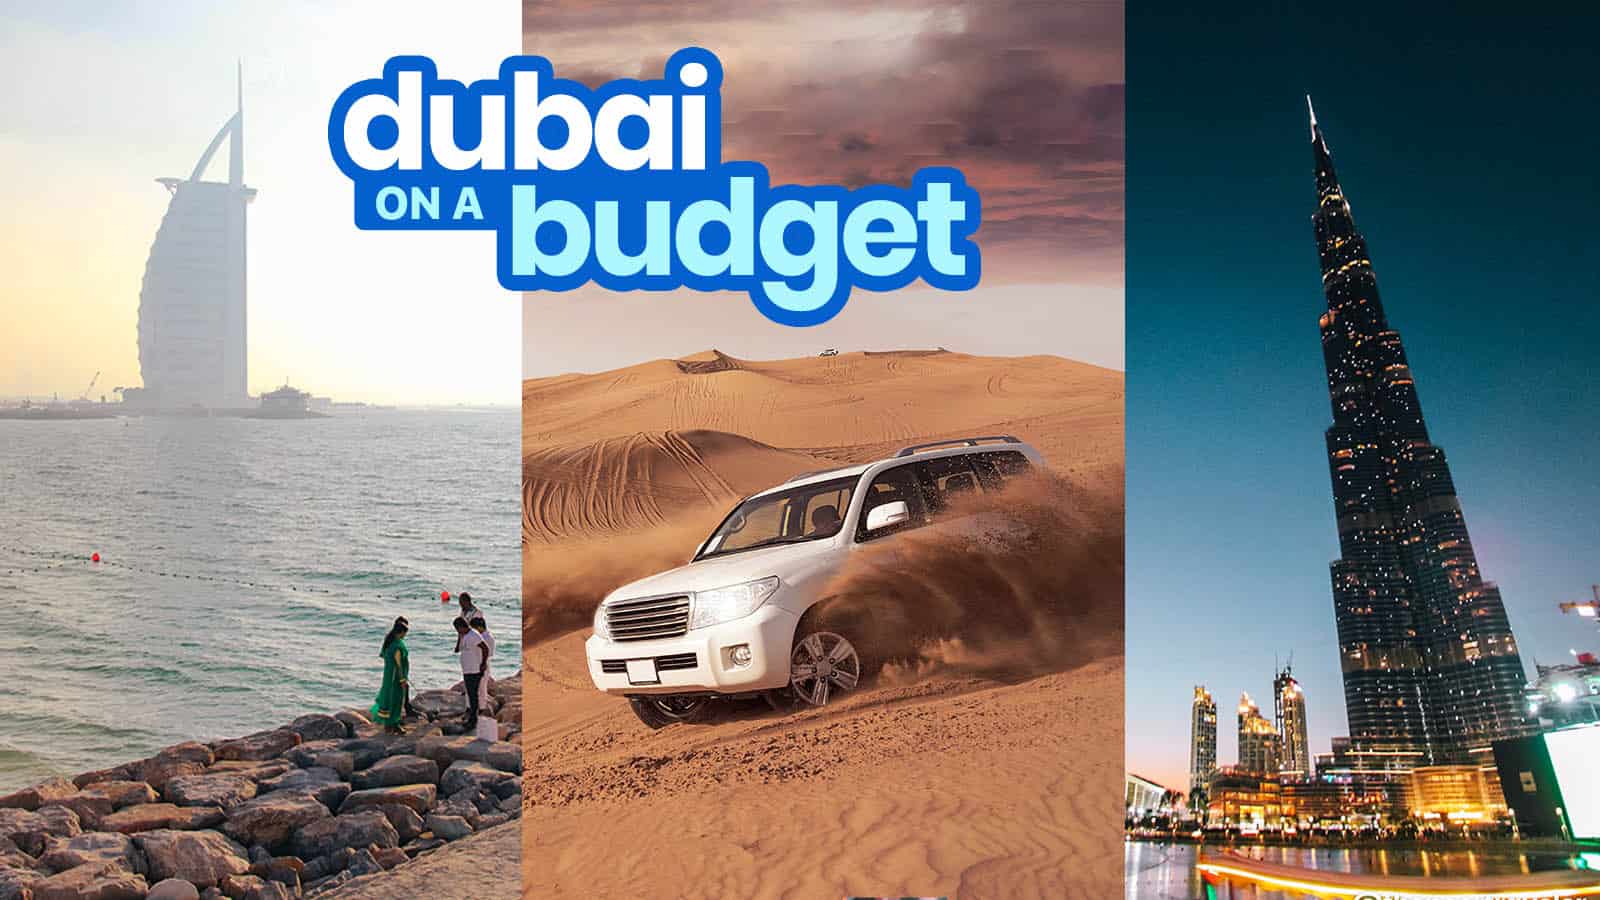 DUBAI TRAVEL GUIDE with Budget Itinerary | The Poor Traveler Itinerary Blog